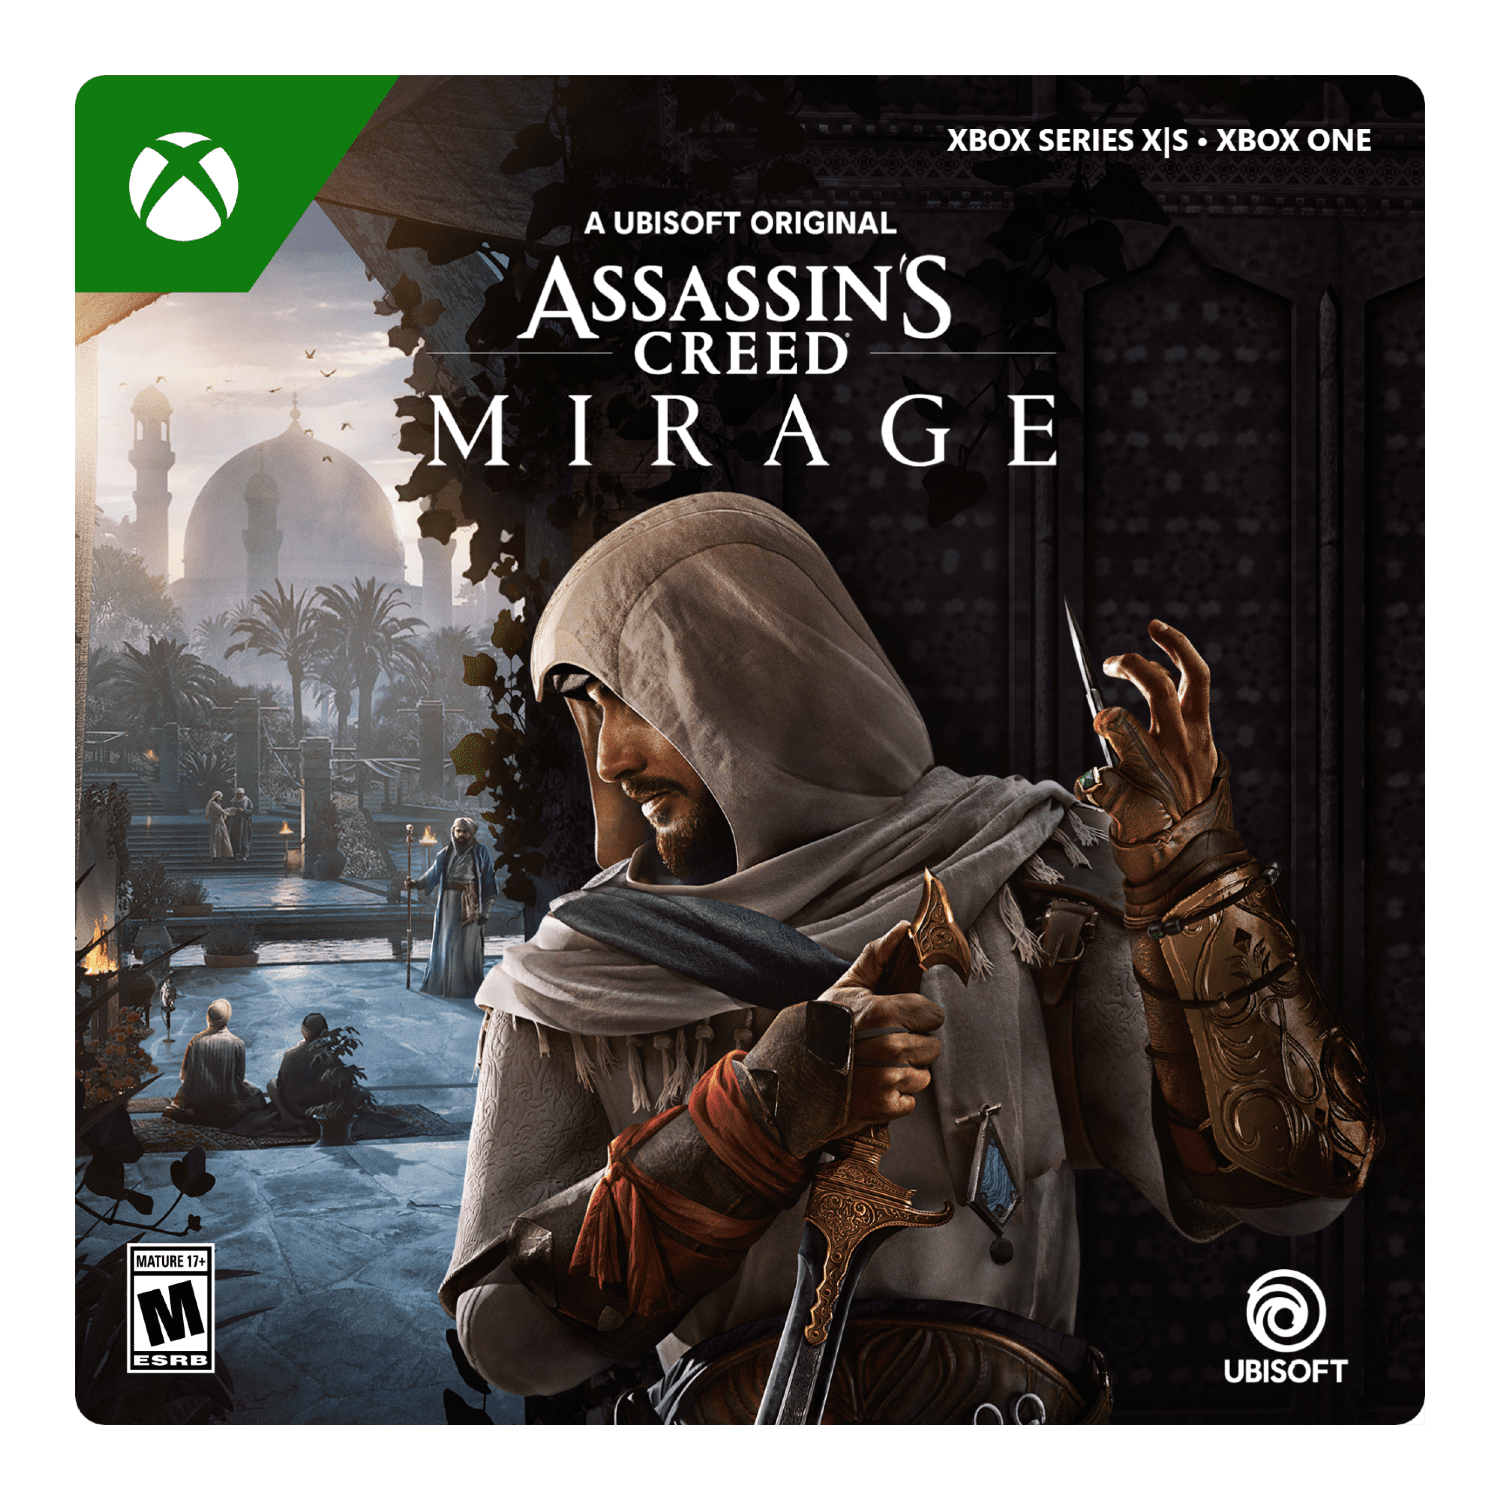 Assassin's Creed Mirage Deluxe Edition Xbox One e Series X